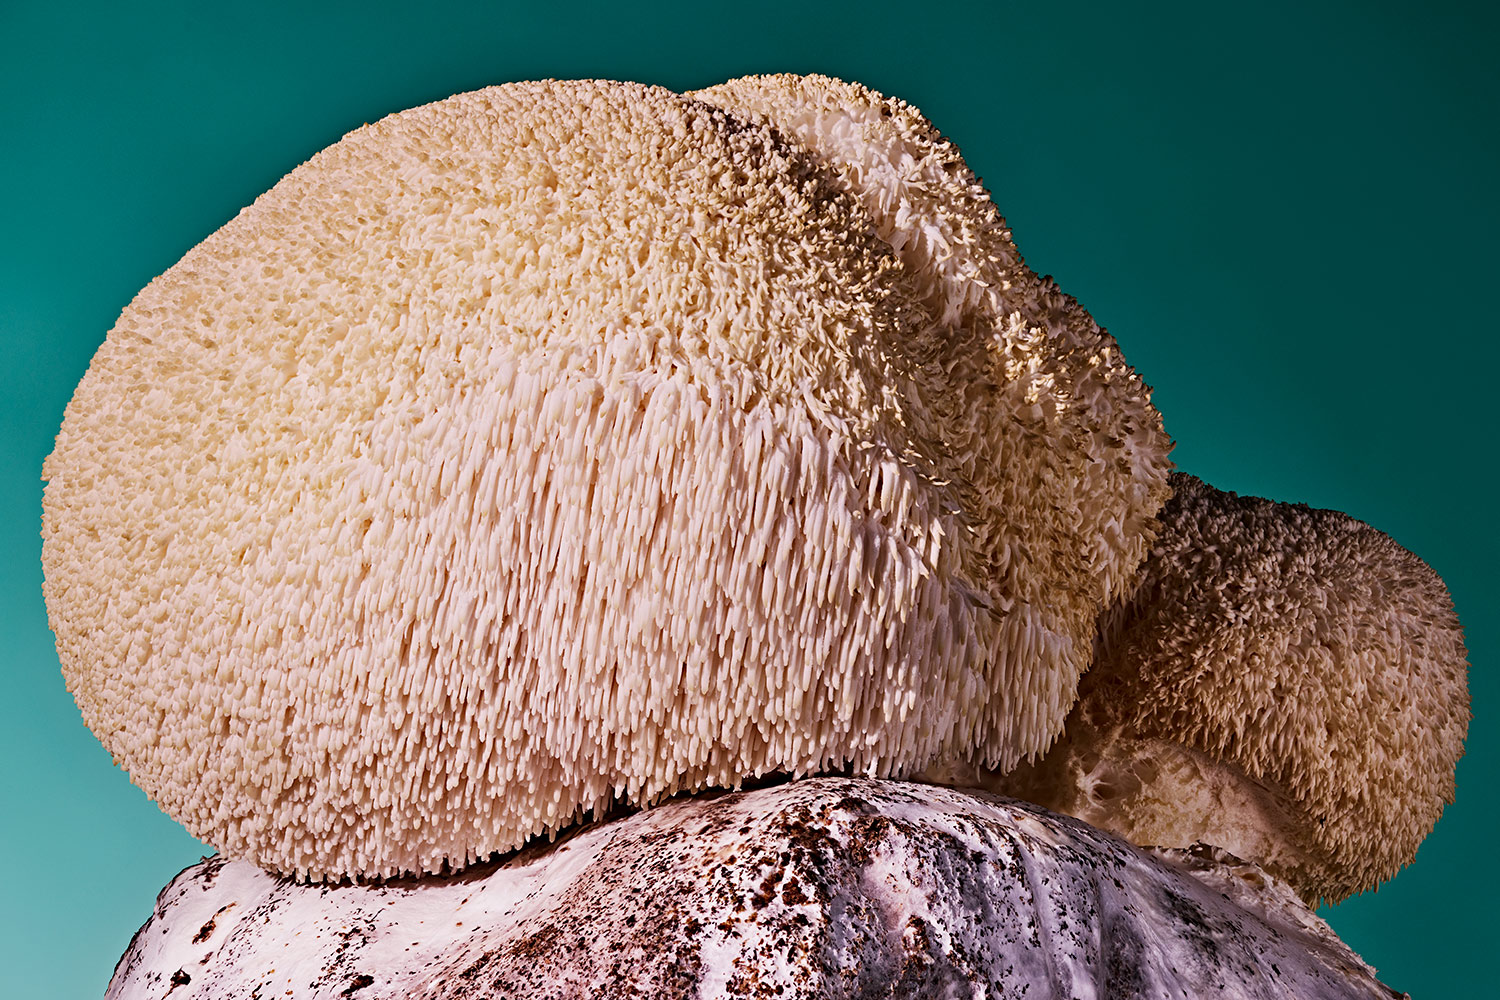 Lion's mane mushroom in front of a blue-green background